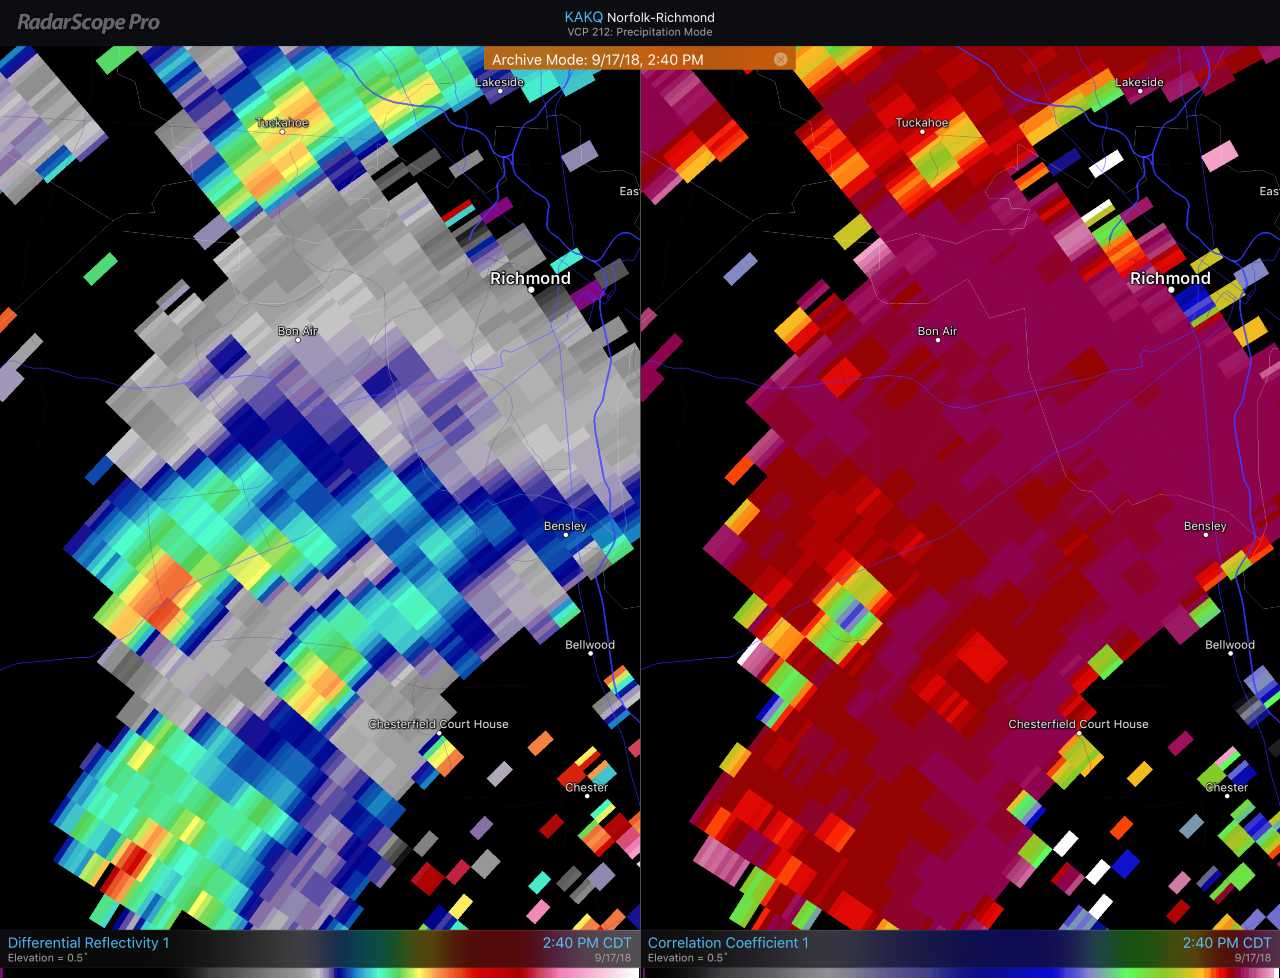 Differential Reflectivity and Correlation Coefficient of Midlothian Storm